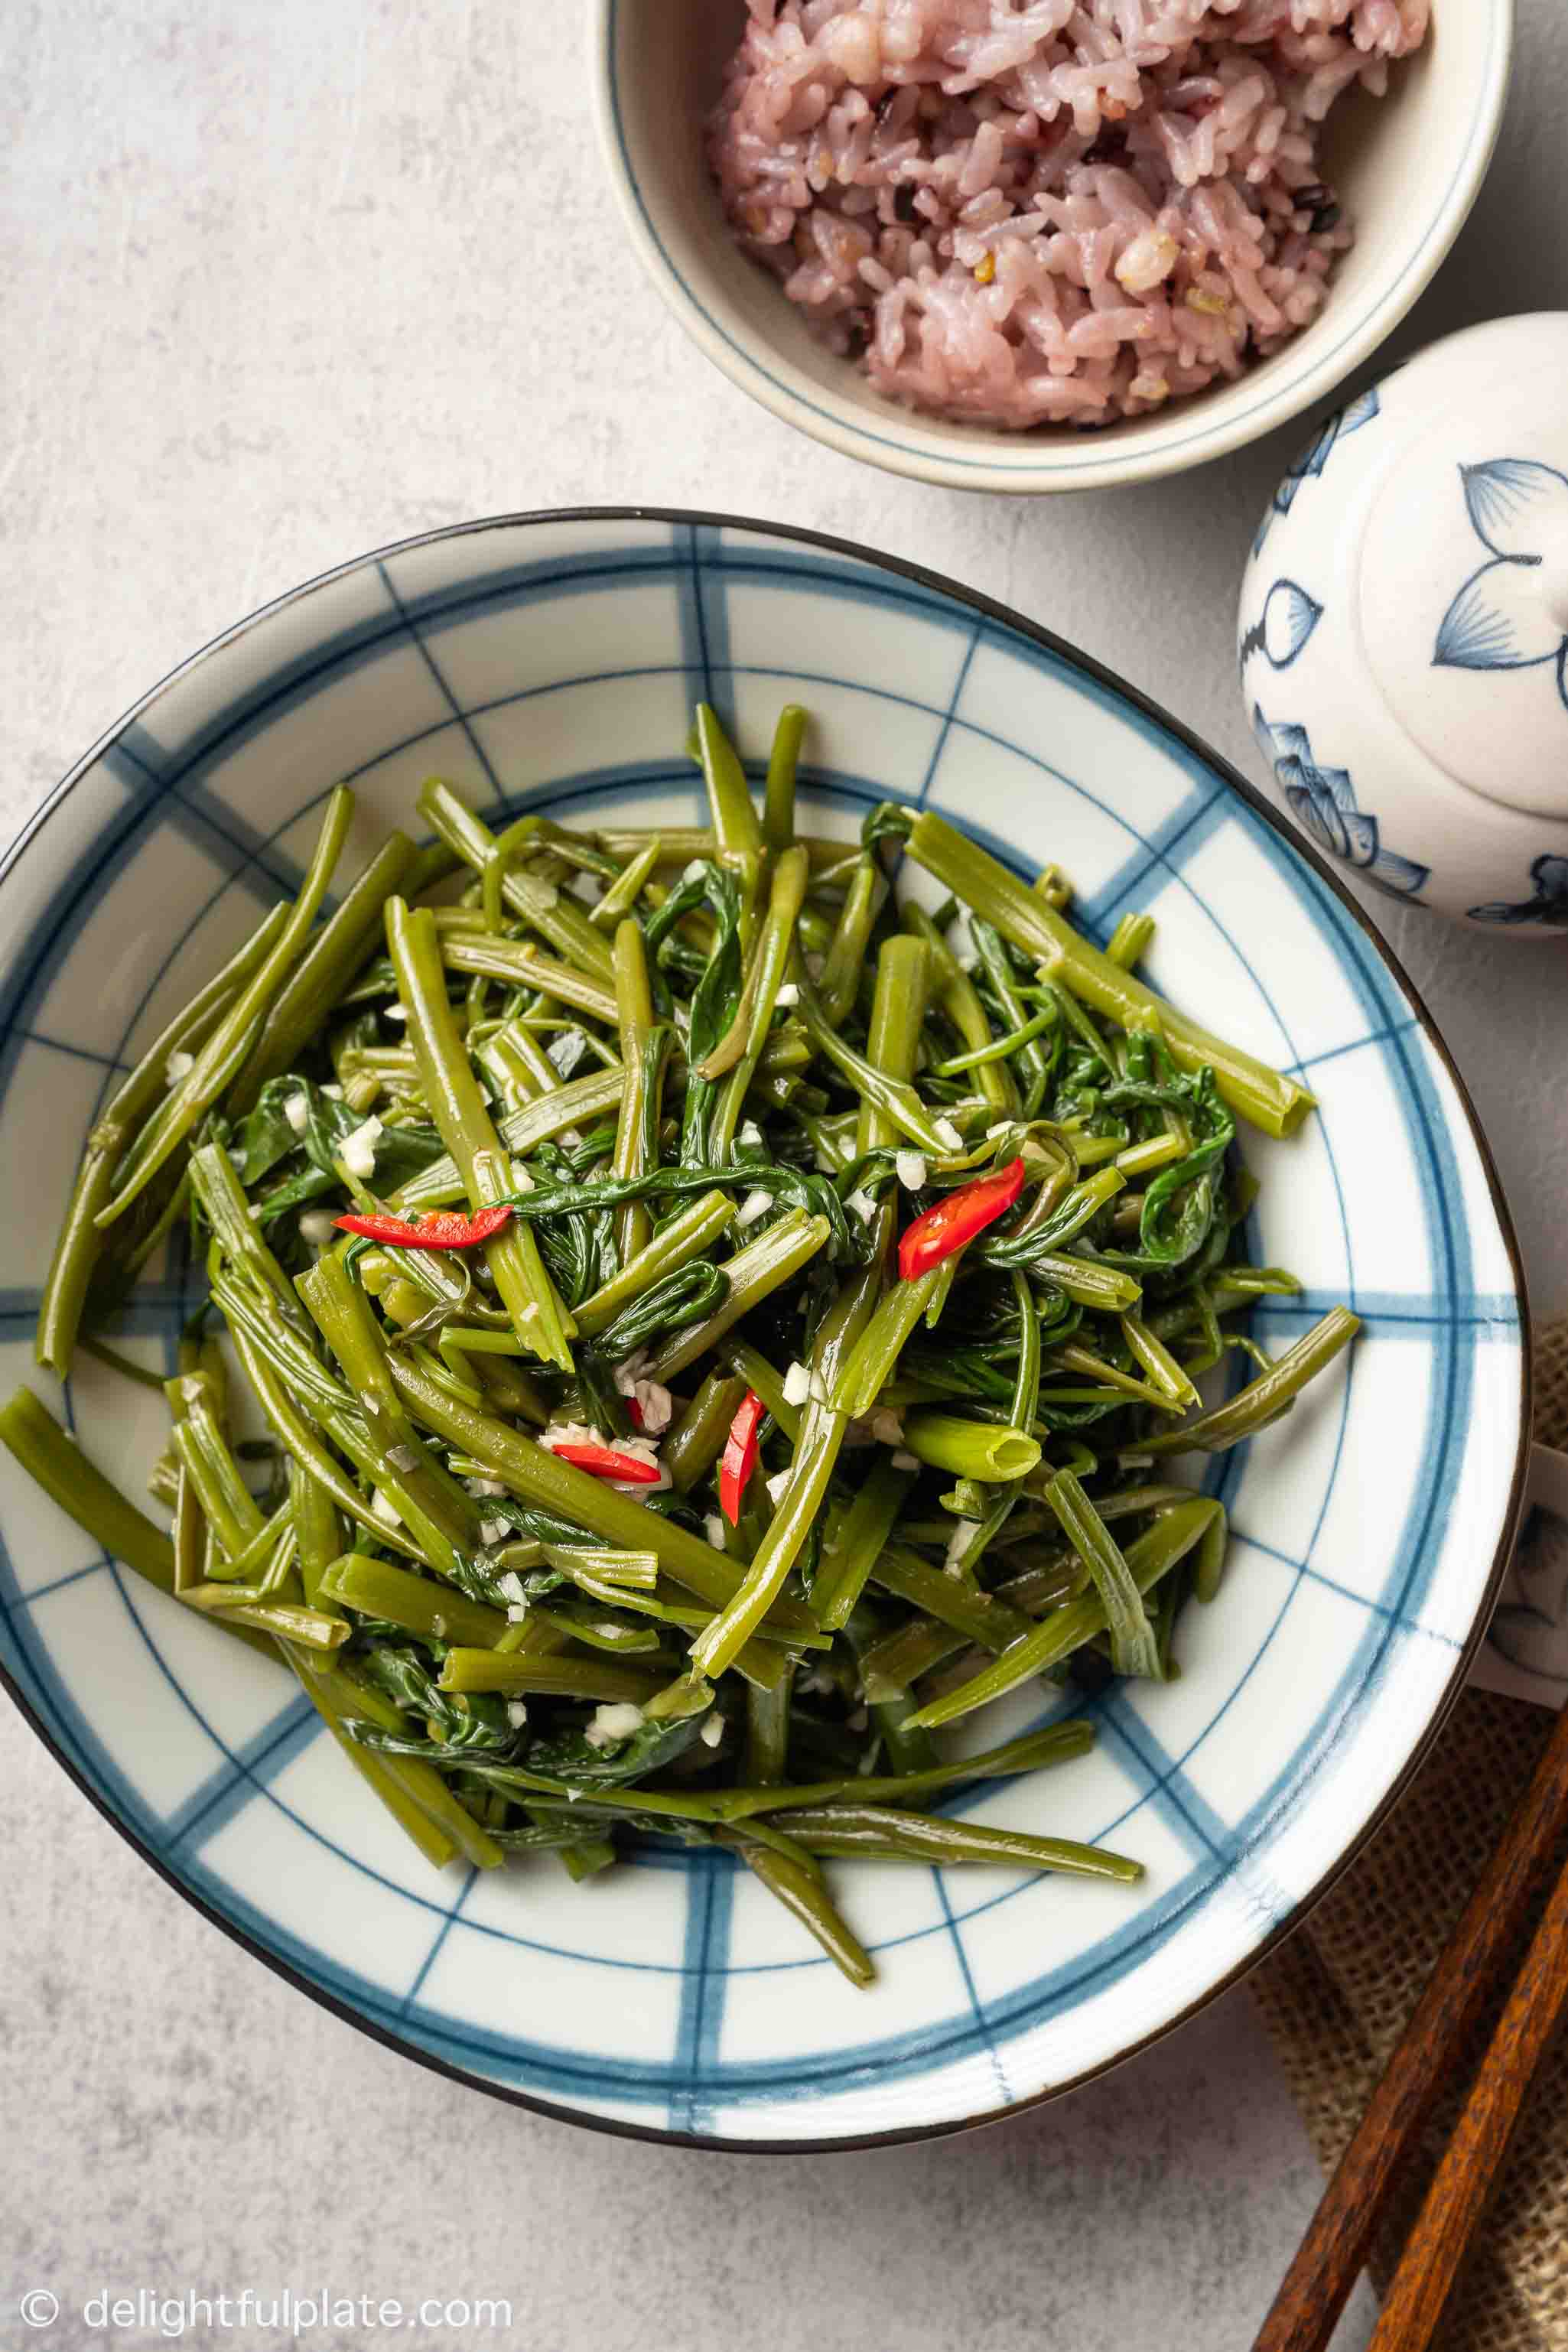 a plate of seasoned Ong Choy side dish